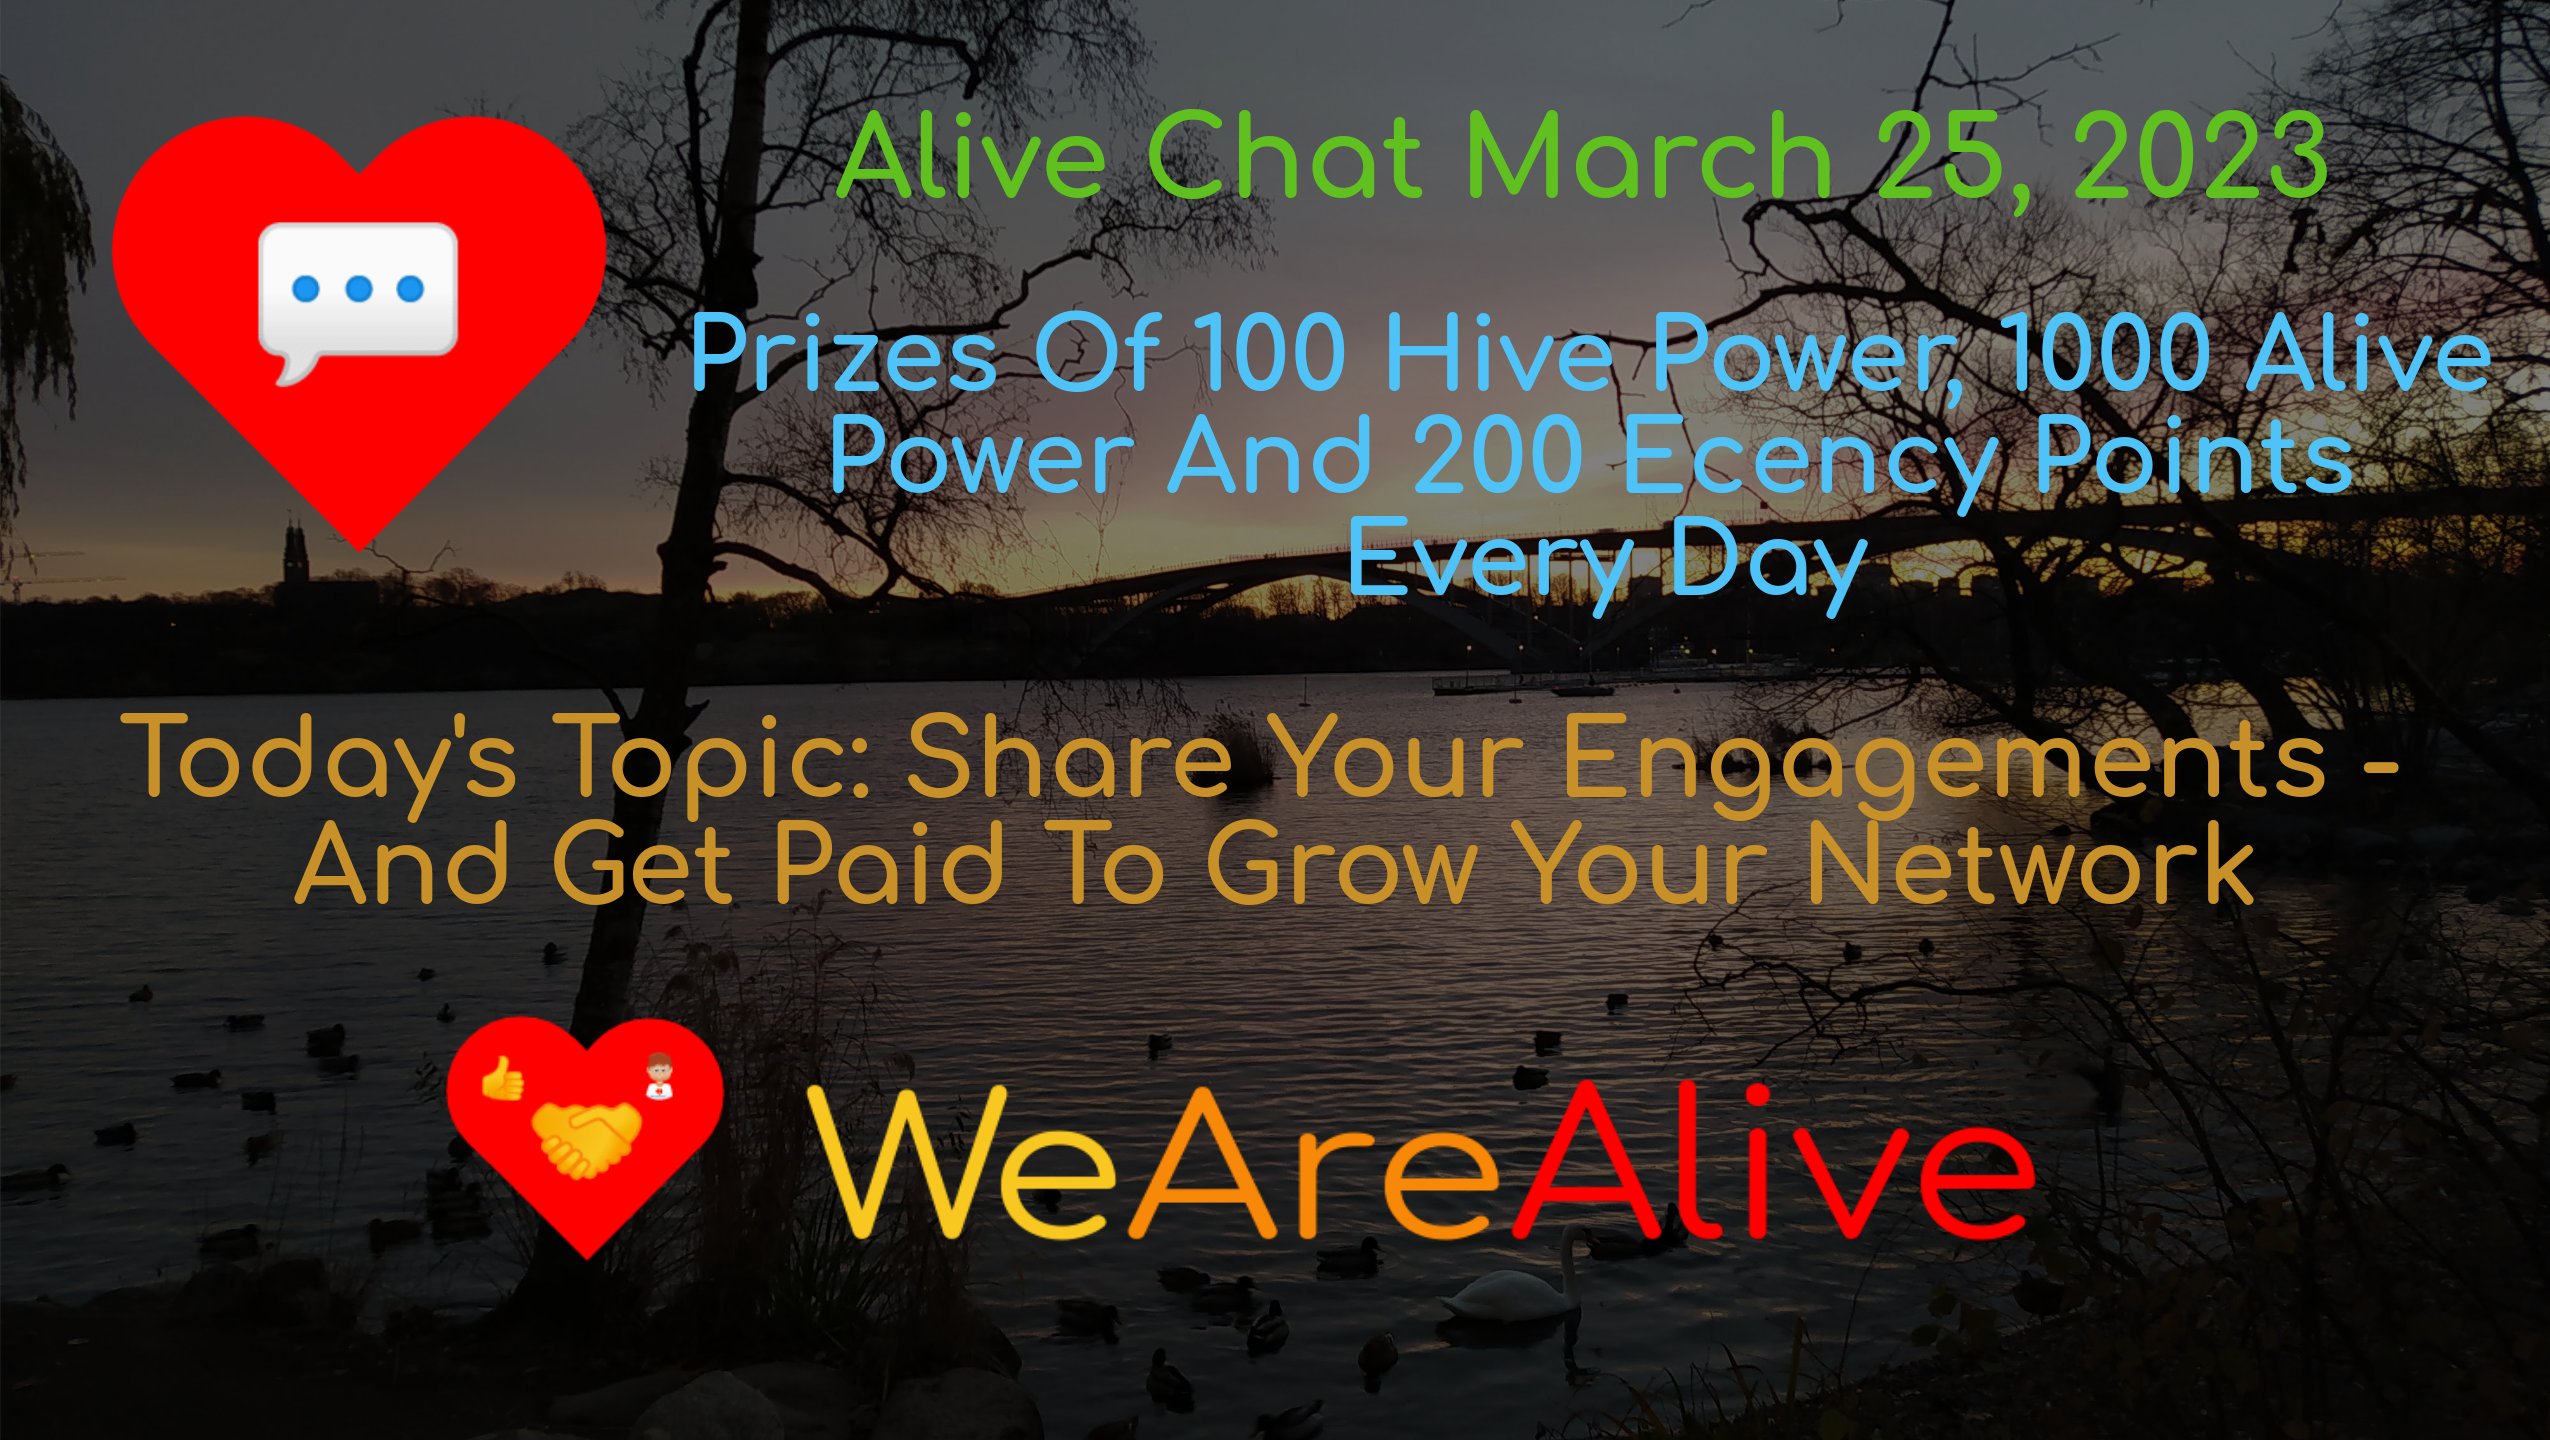 @alive.chat/alive-chat-march-25-2023